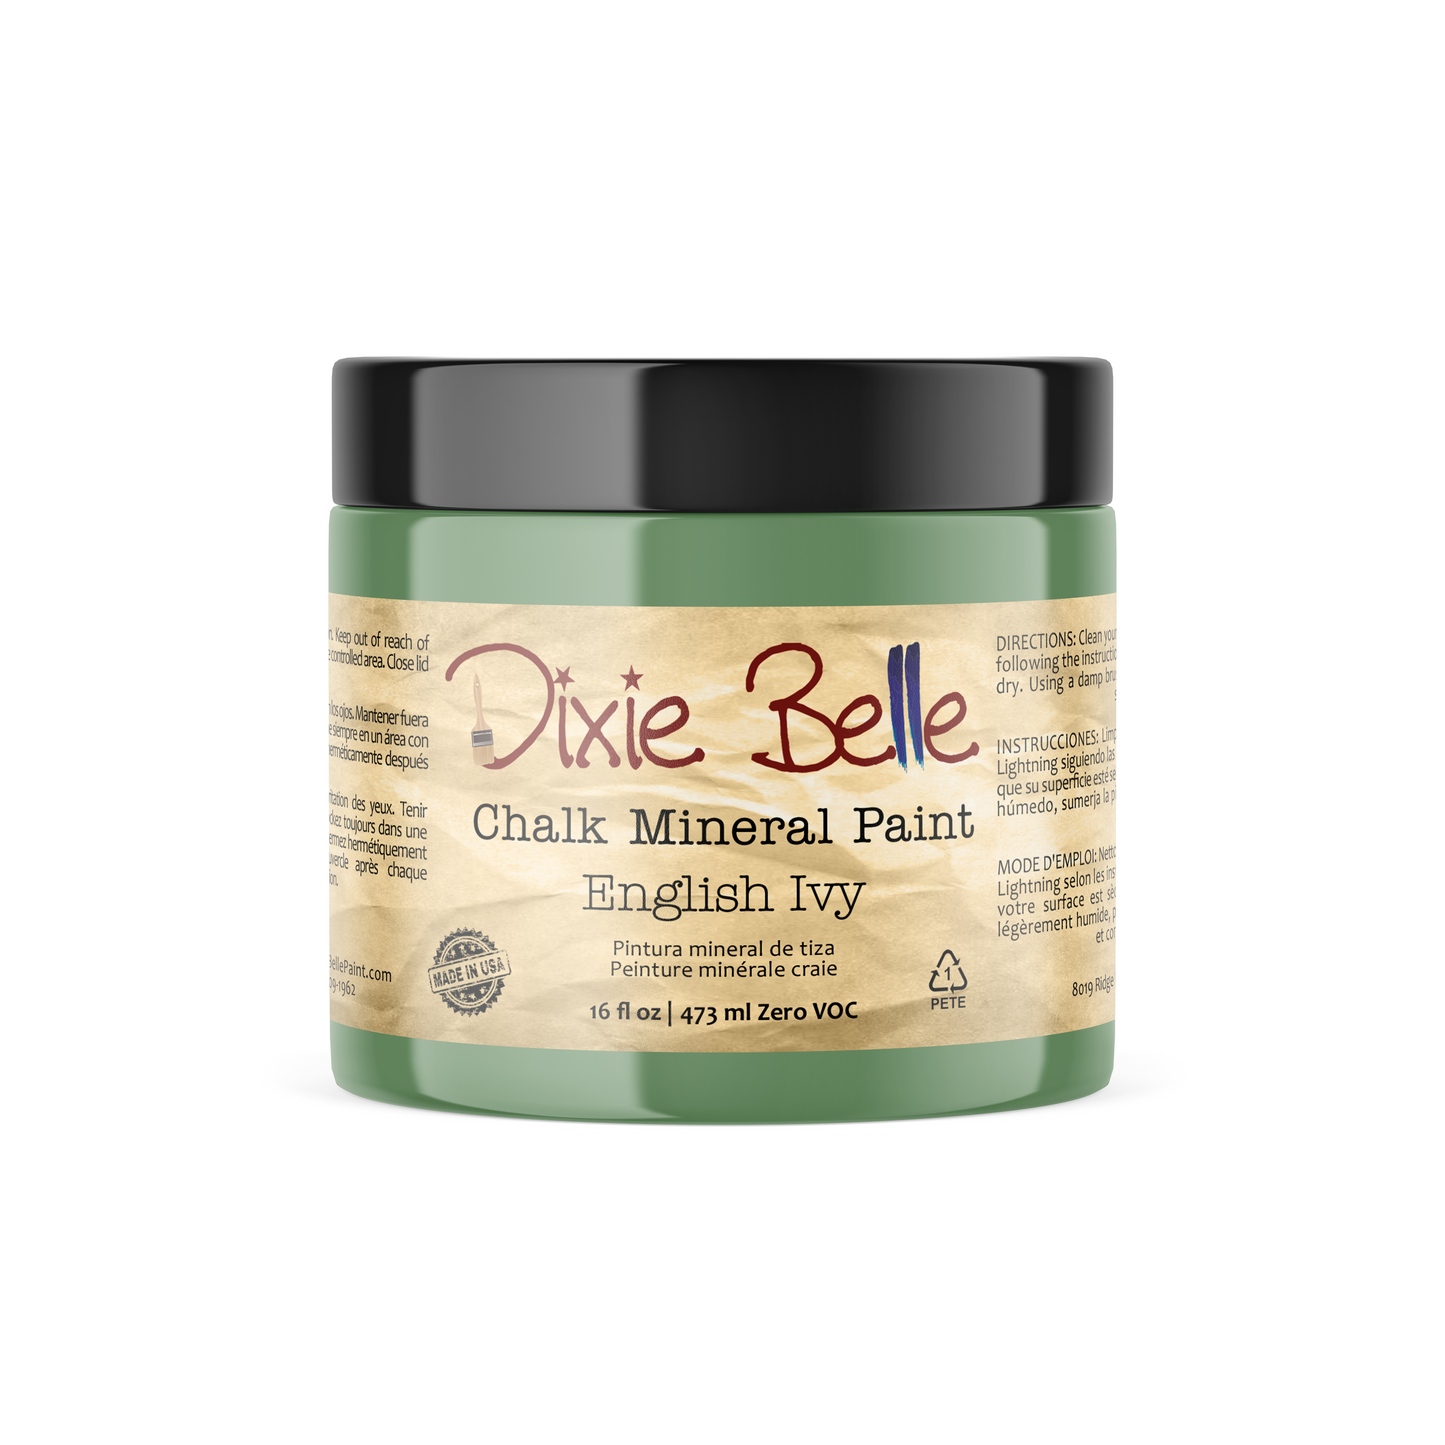 NEW - English Ivy - Dixie Belle Chalk Mineral Paint